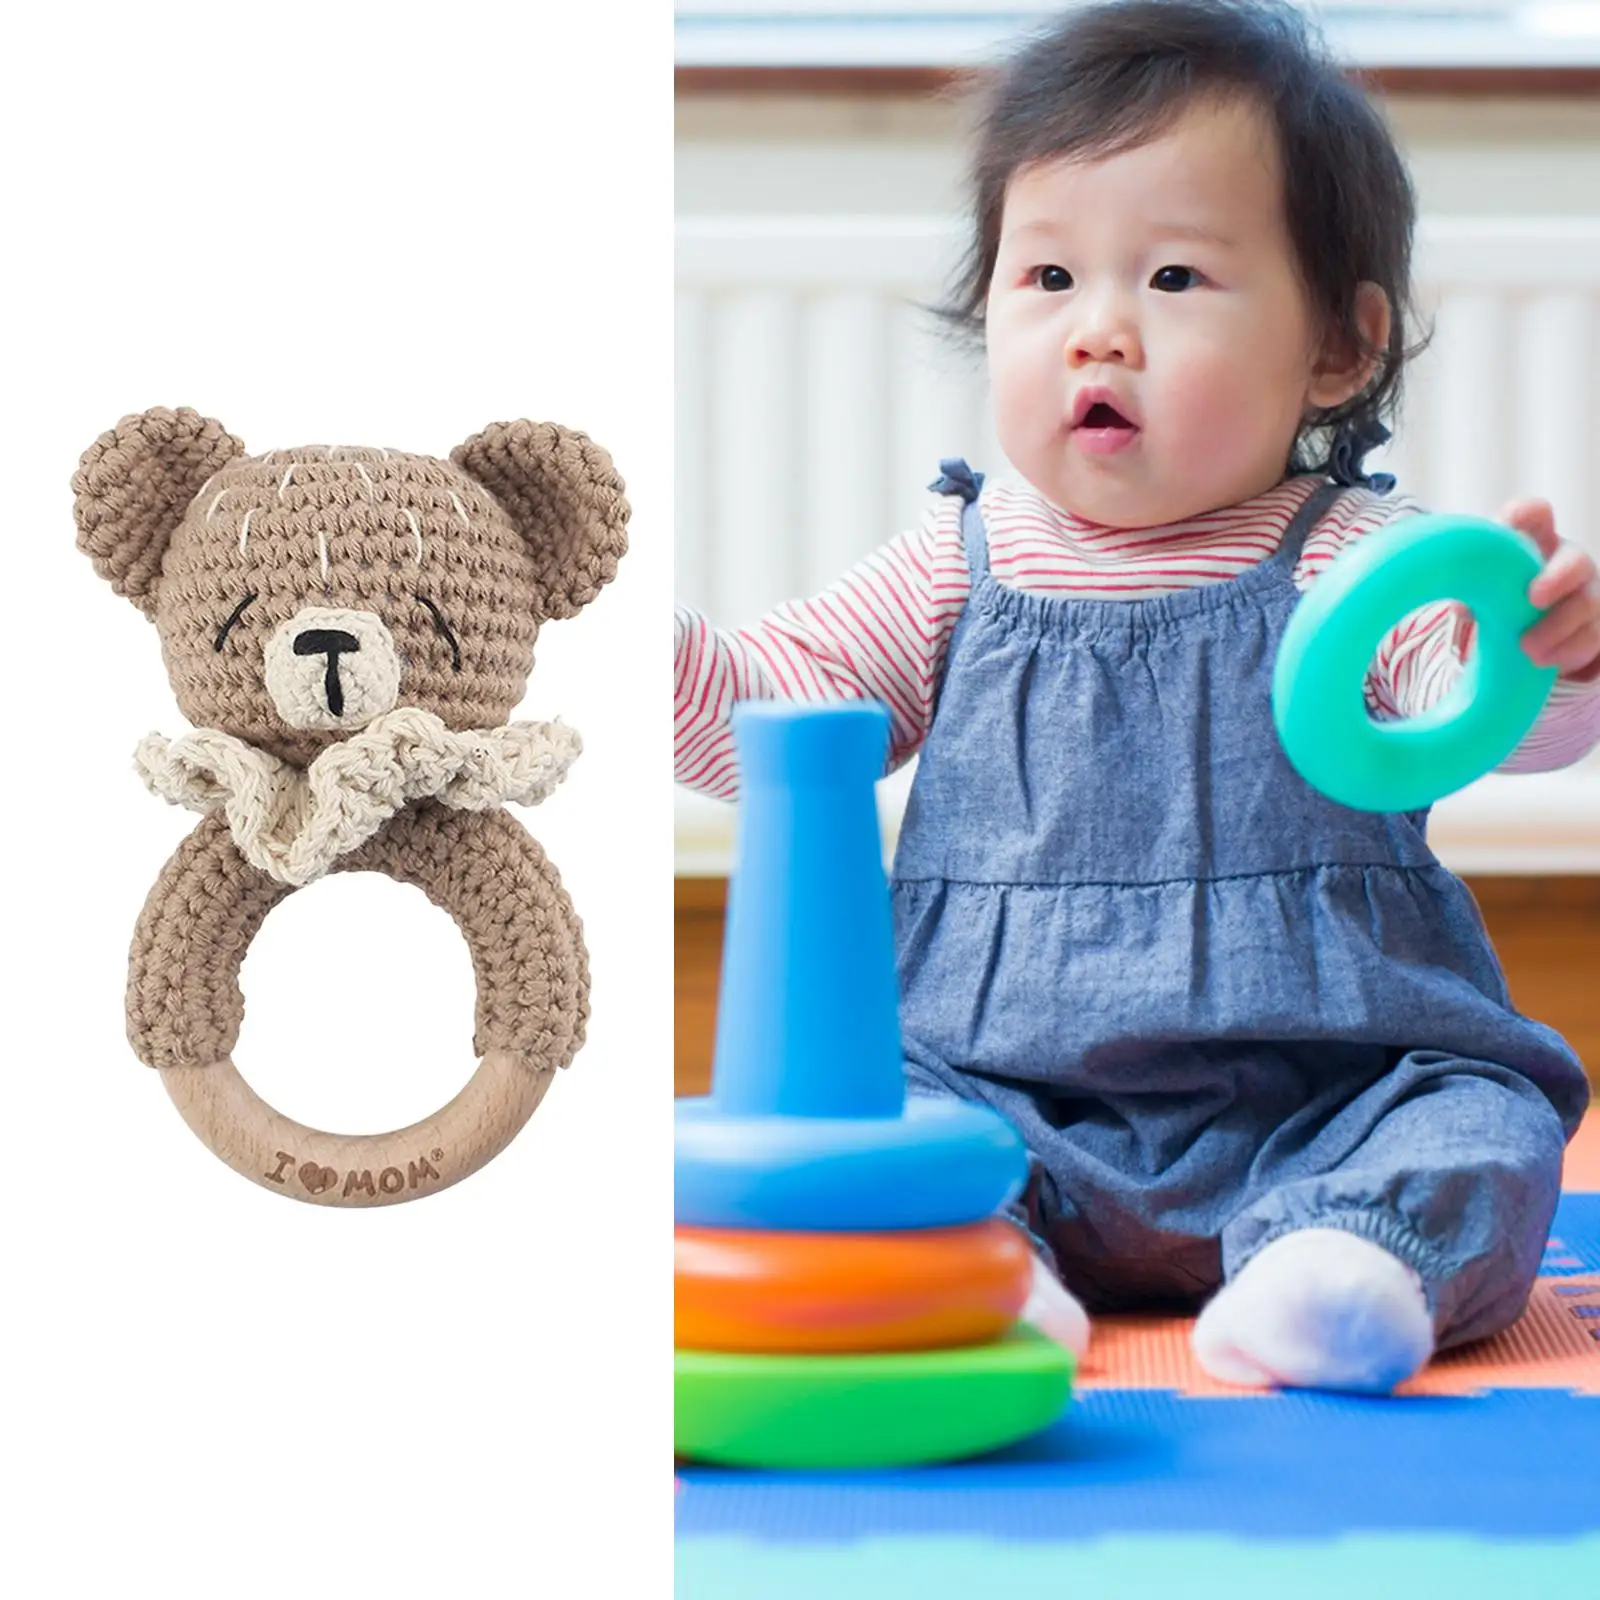 Toddlers Wooden Rattle Stroller Toys,Baby Grasping Toy Shower Gift,Fine Motor Learning,Crochet Baby Rattle, Baby Rattle